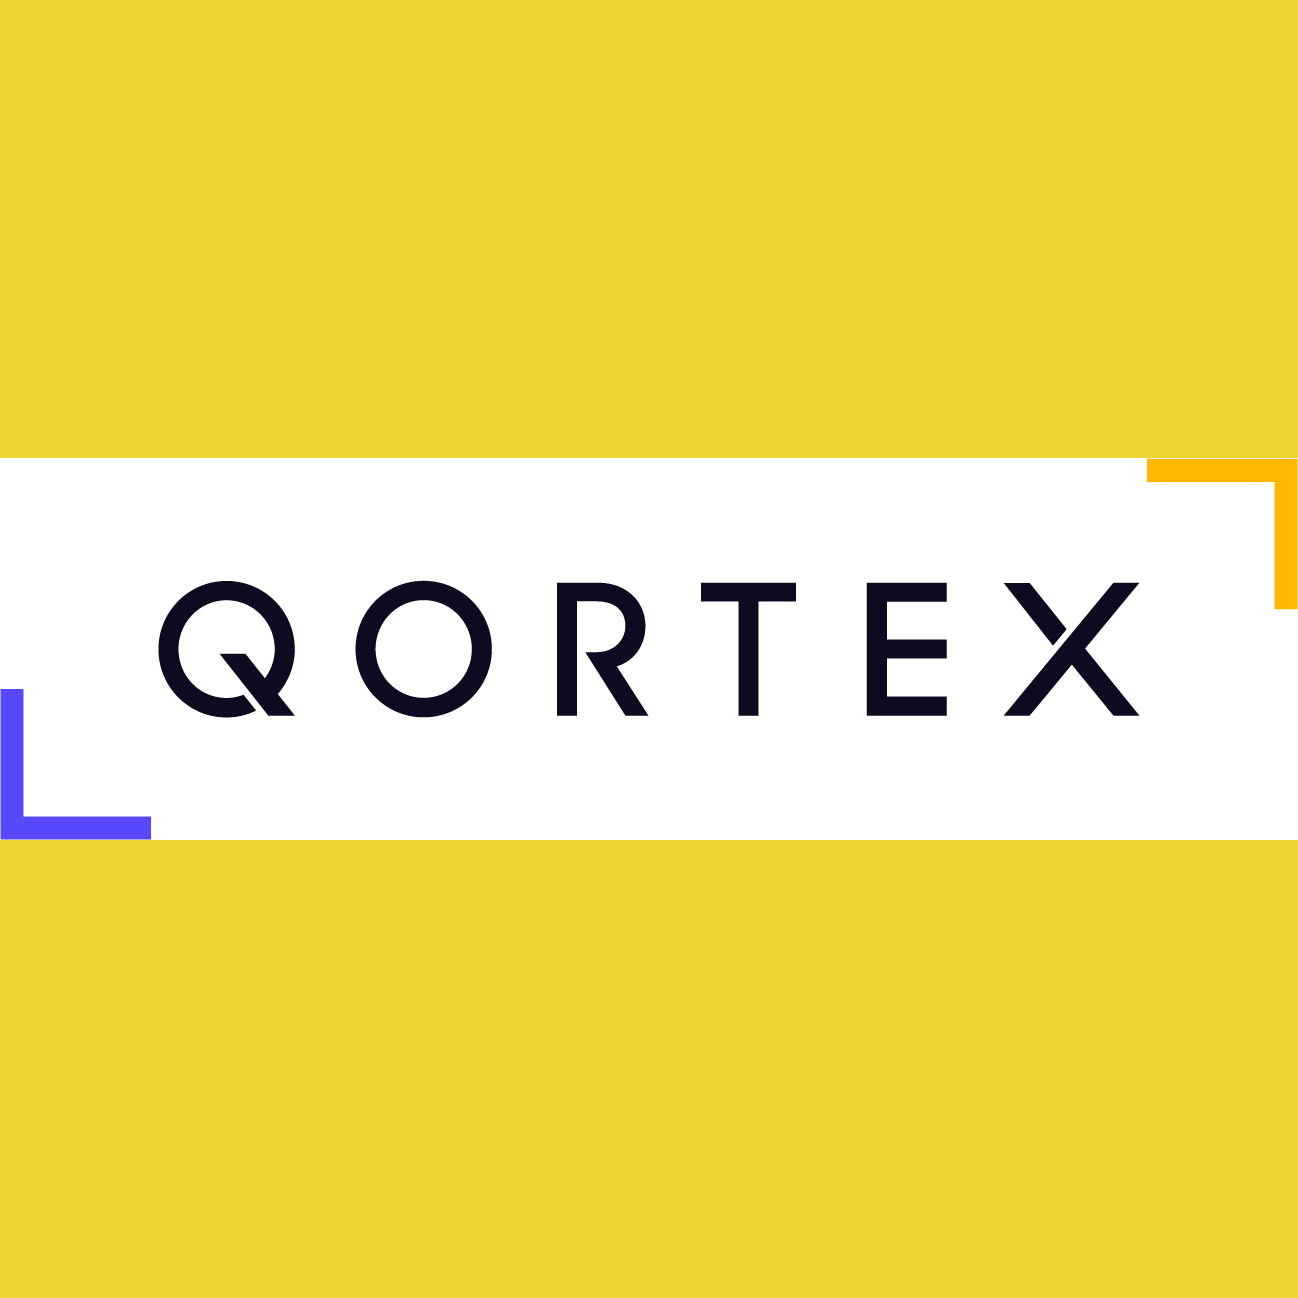 Cover image for  article: Qortex Announces Key Leadership Appointments amid Dramatic Growth - Signaling Increased Demand for Pioneering AI Solutions